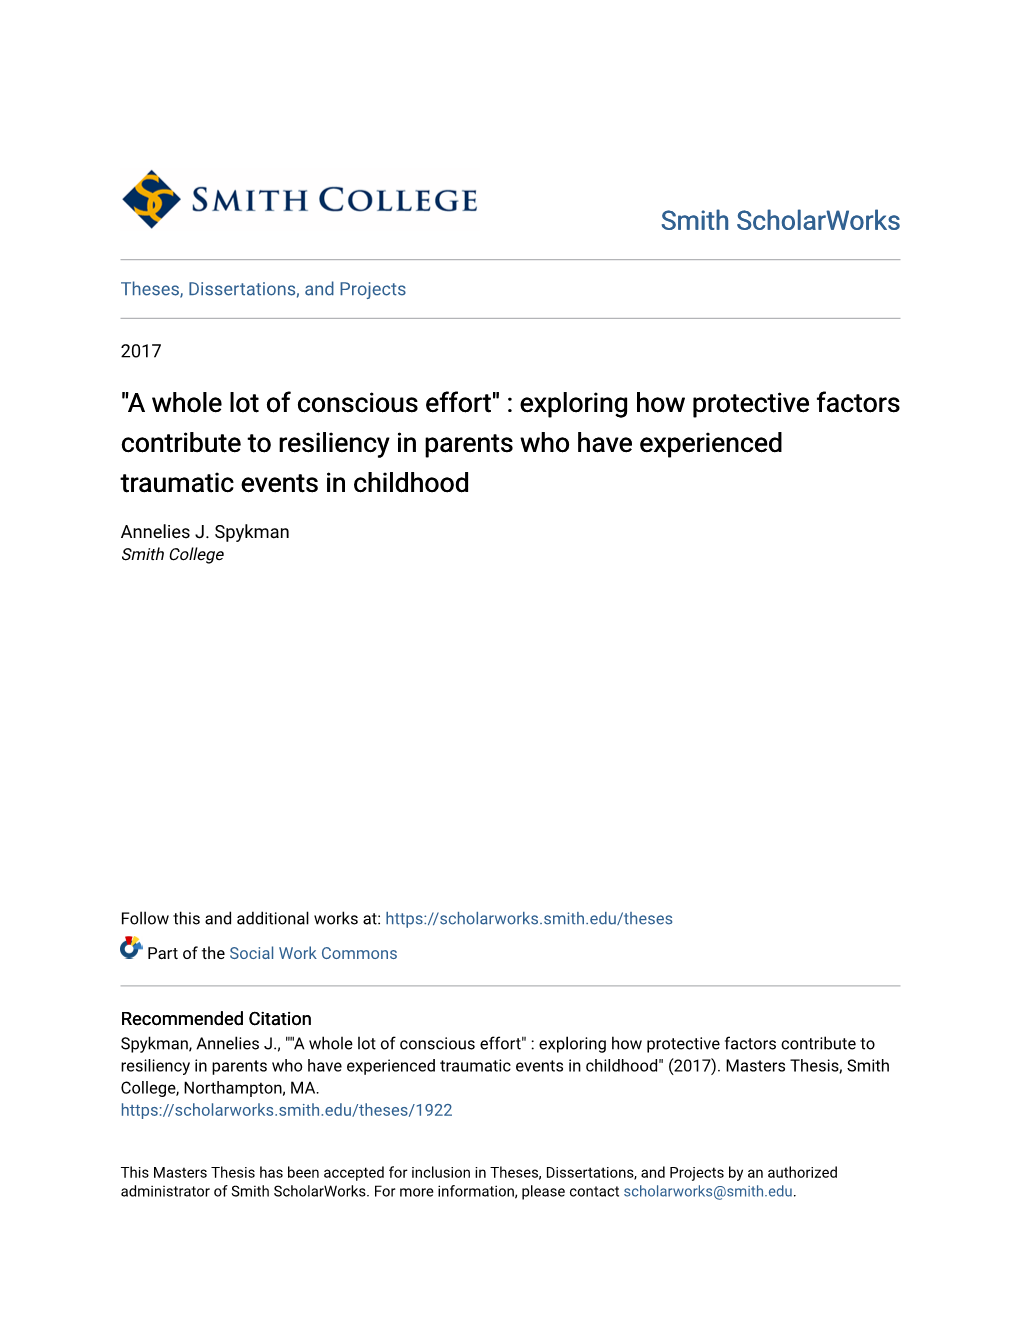 A Whole Lot of Conscious Effort" : Exploring How Protective Factors Contribute to Resiliency in Parents Who Have Experienced Traumatic Events in Childhood